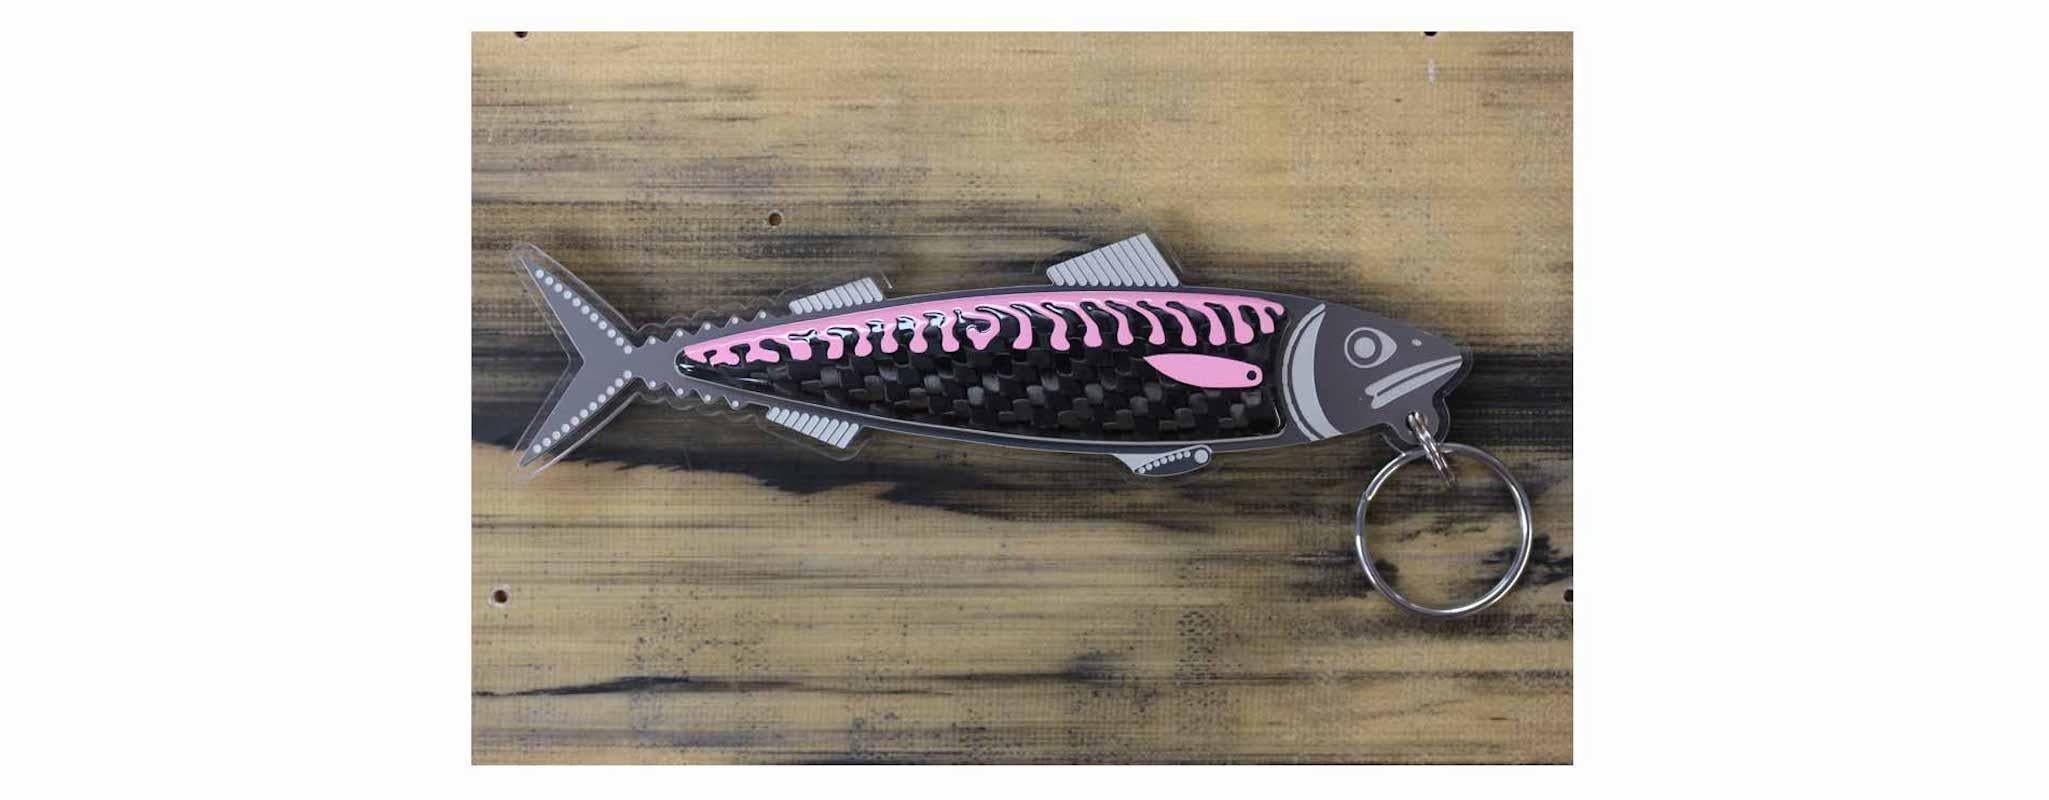 This sculpture shows stylised engineered mackerel / piranha / trout used as a keyring.
Sculpture limited to five hundred pieces per colour option.

Colour options:
• blue
• red
• silver
• white
• yellow
• orange
• fluoro orange
• green
• turquoise
•